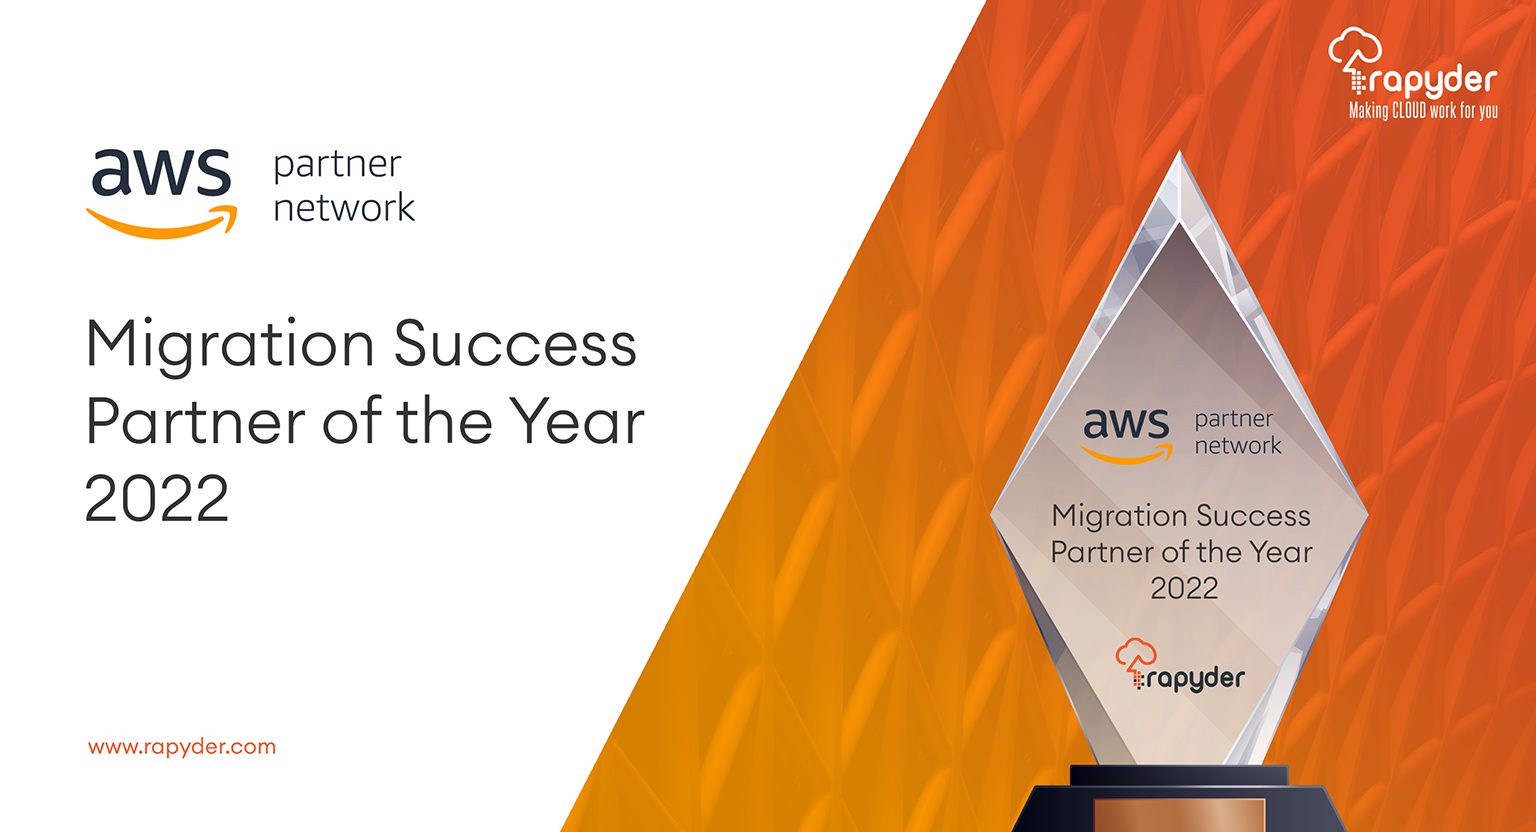 AWS migration success partner of the year 2022